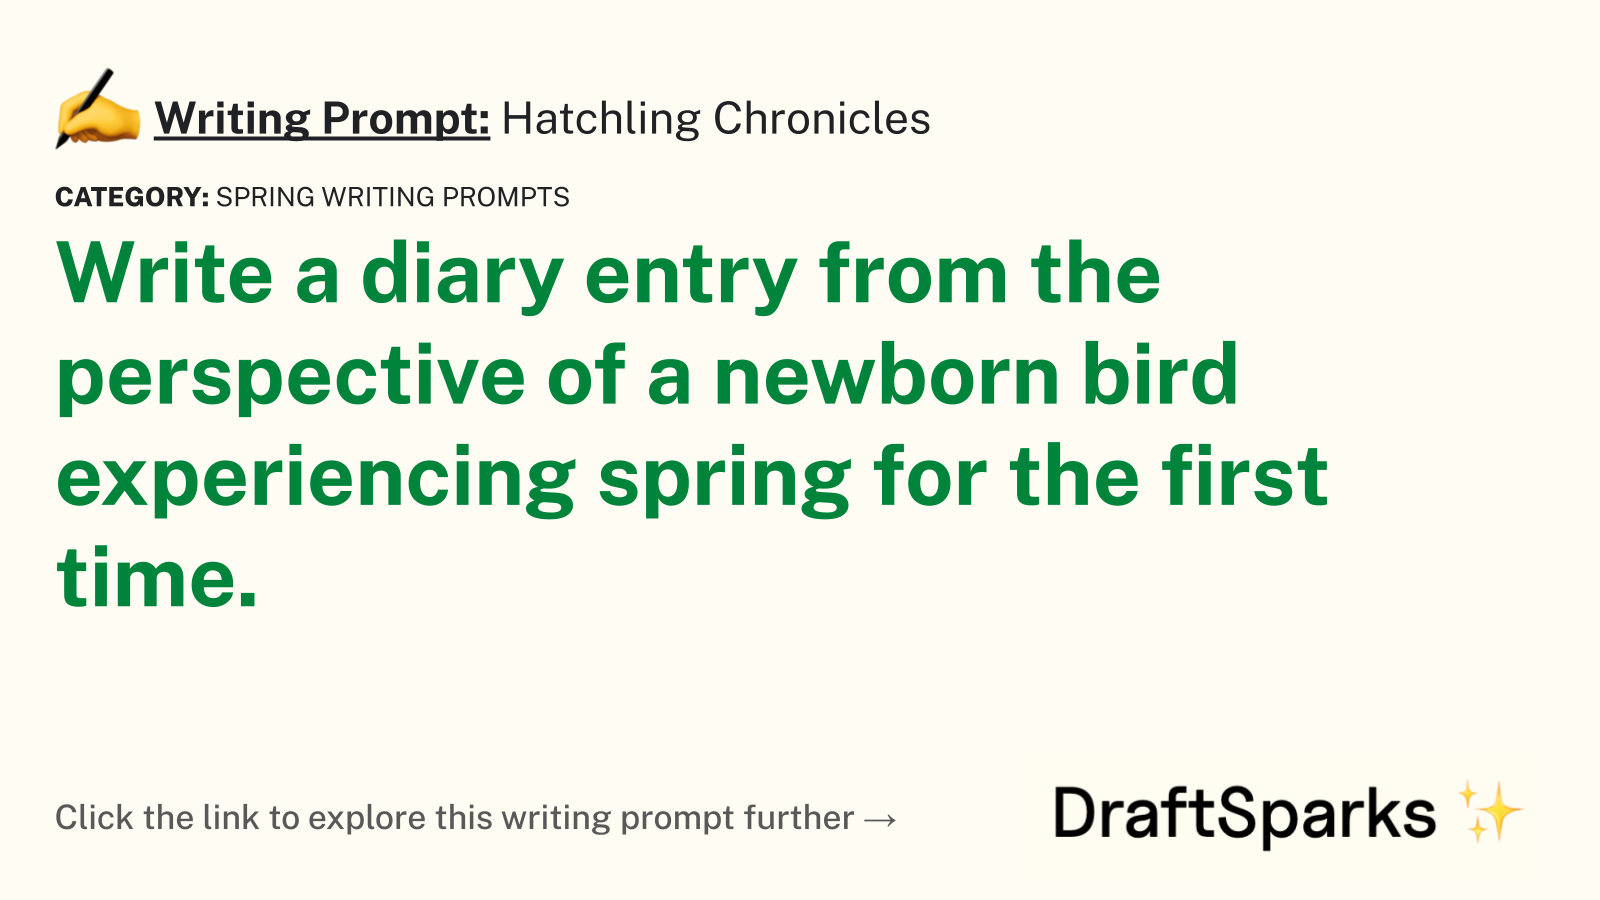 Hatchling Chronicles